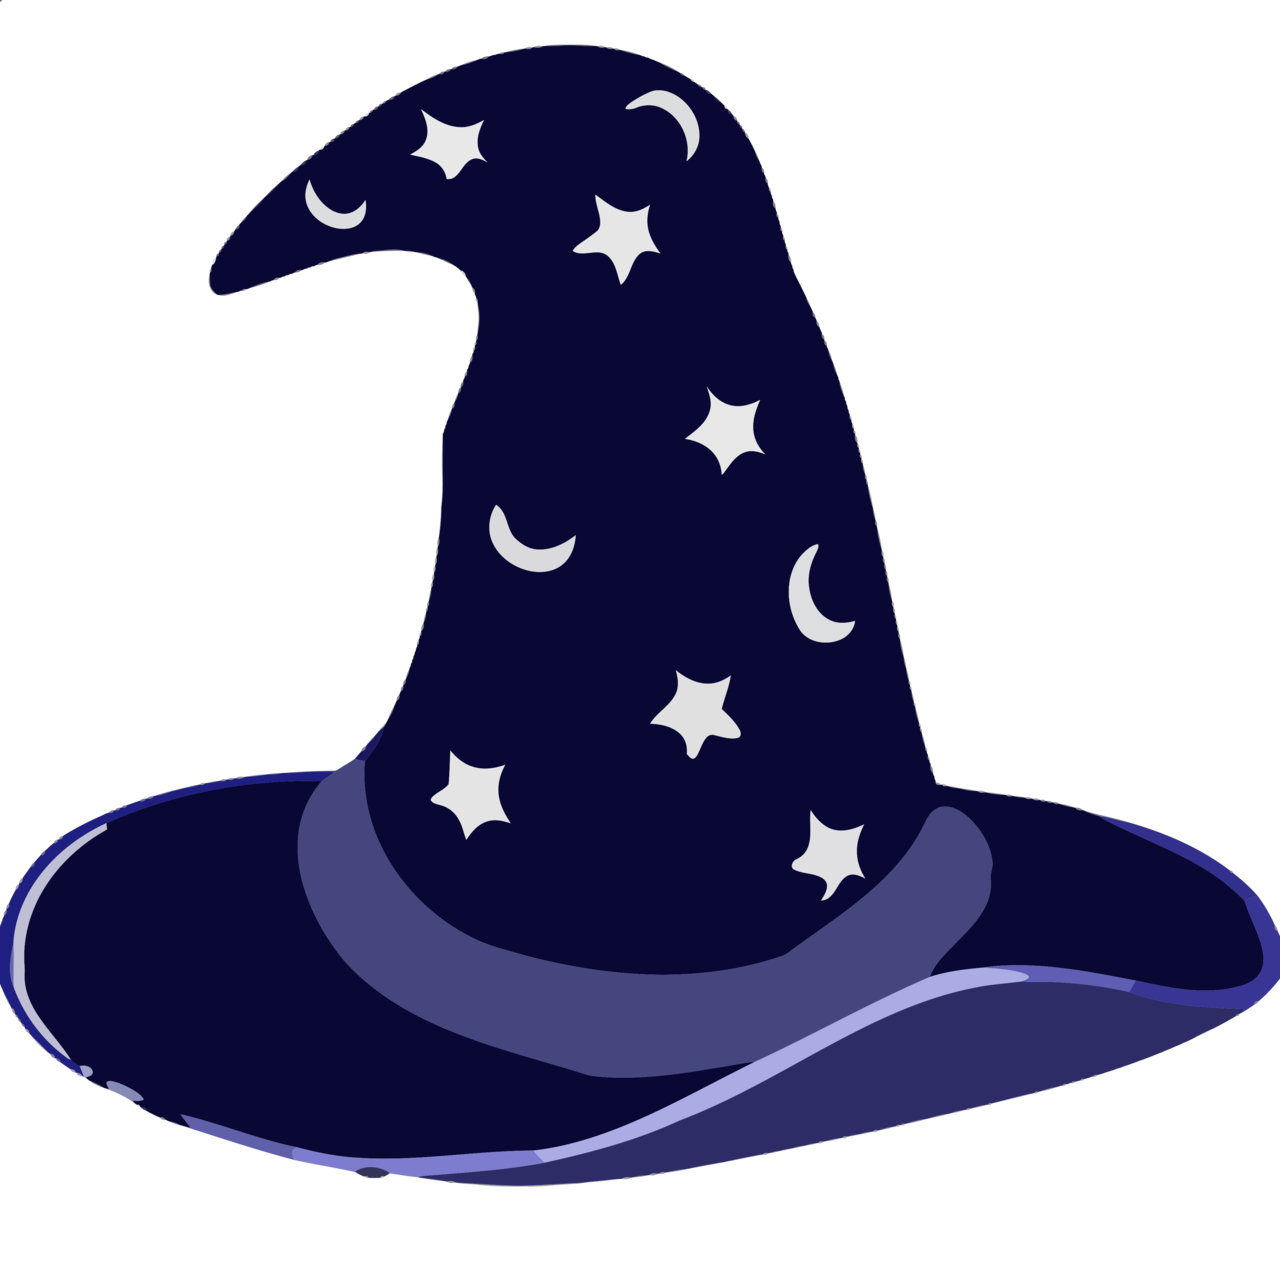 sorcerer mickey hat clipart - photo #22